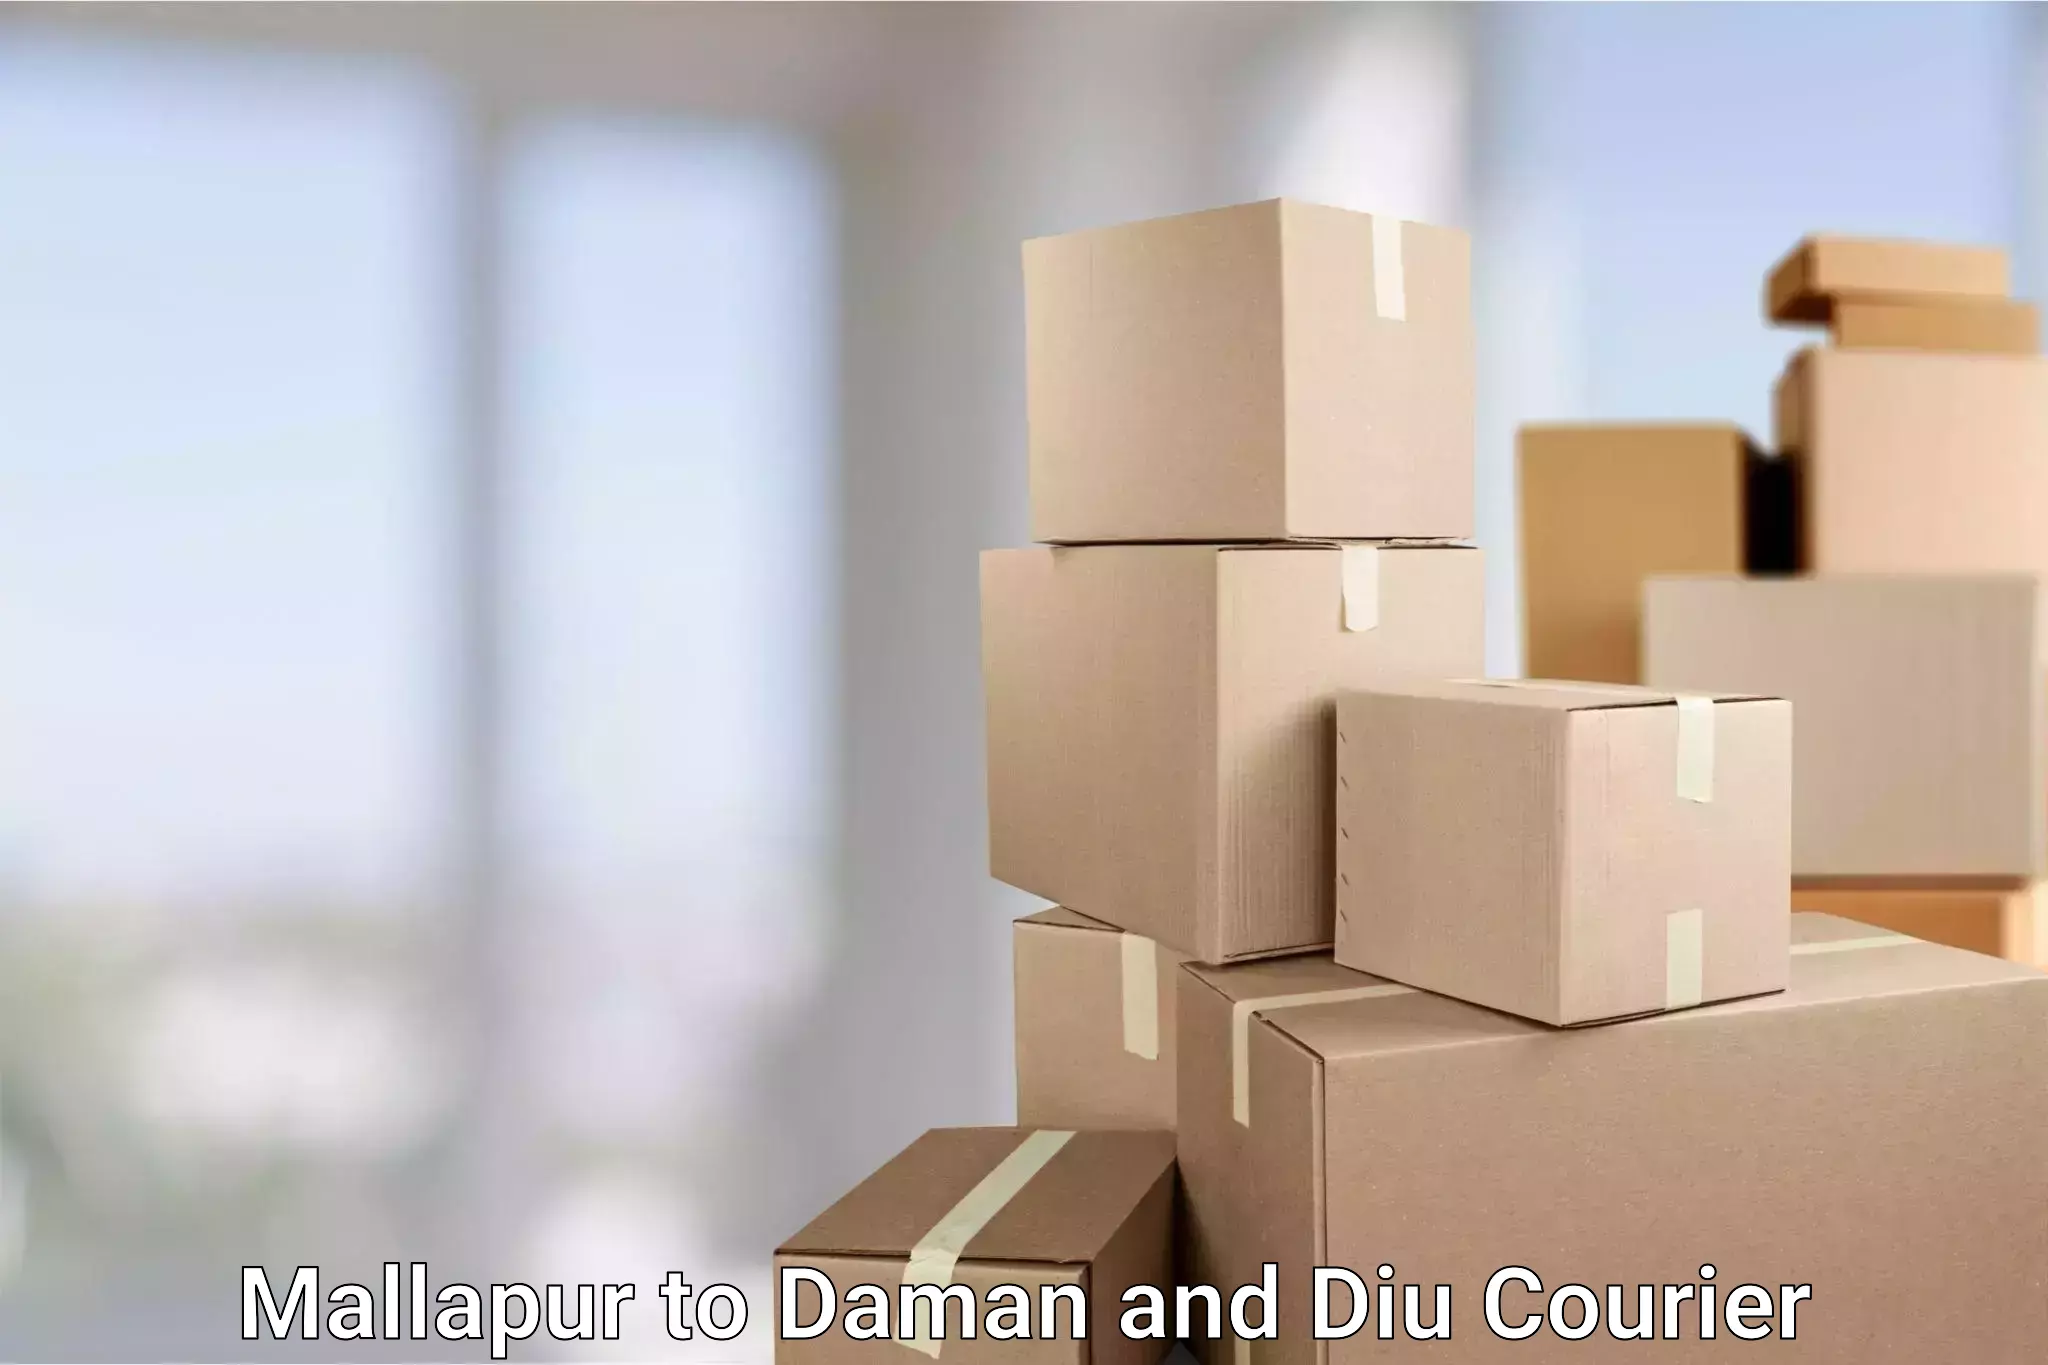 Reliable parcel services Mallapur to Daman and Diu